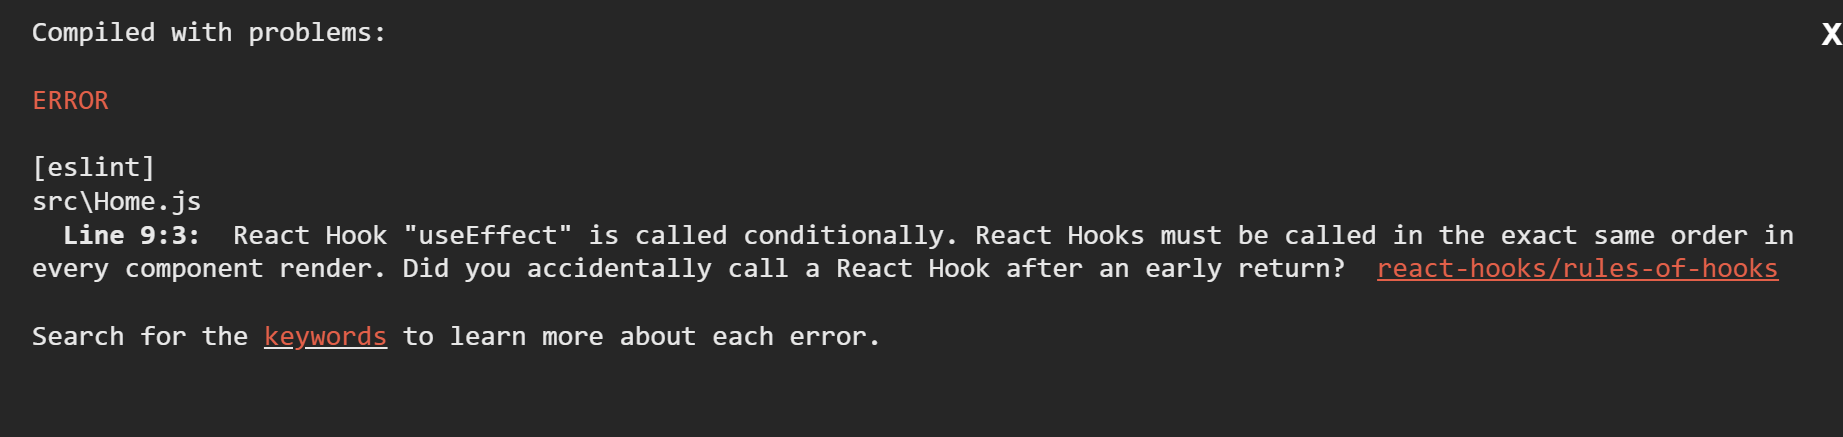 React Hook "useEffect" is called conditionally. React Hooks must be called in the exact same order in every component render. Did you accidentally call a React Hook after an early return?